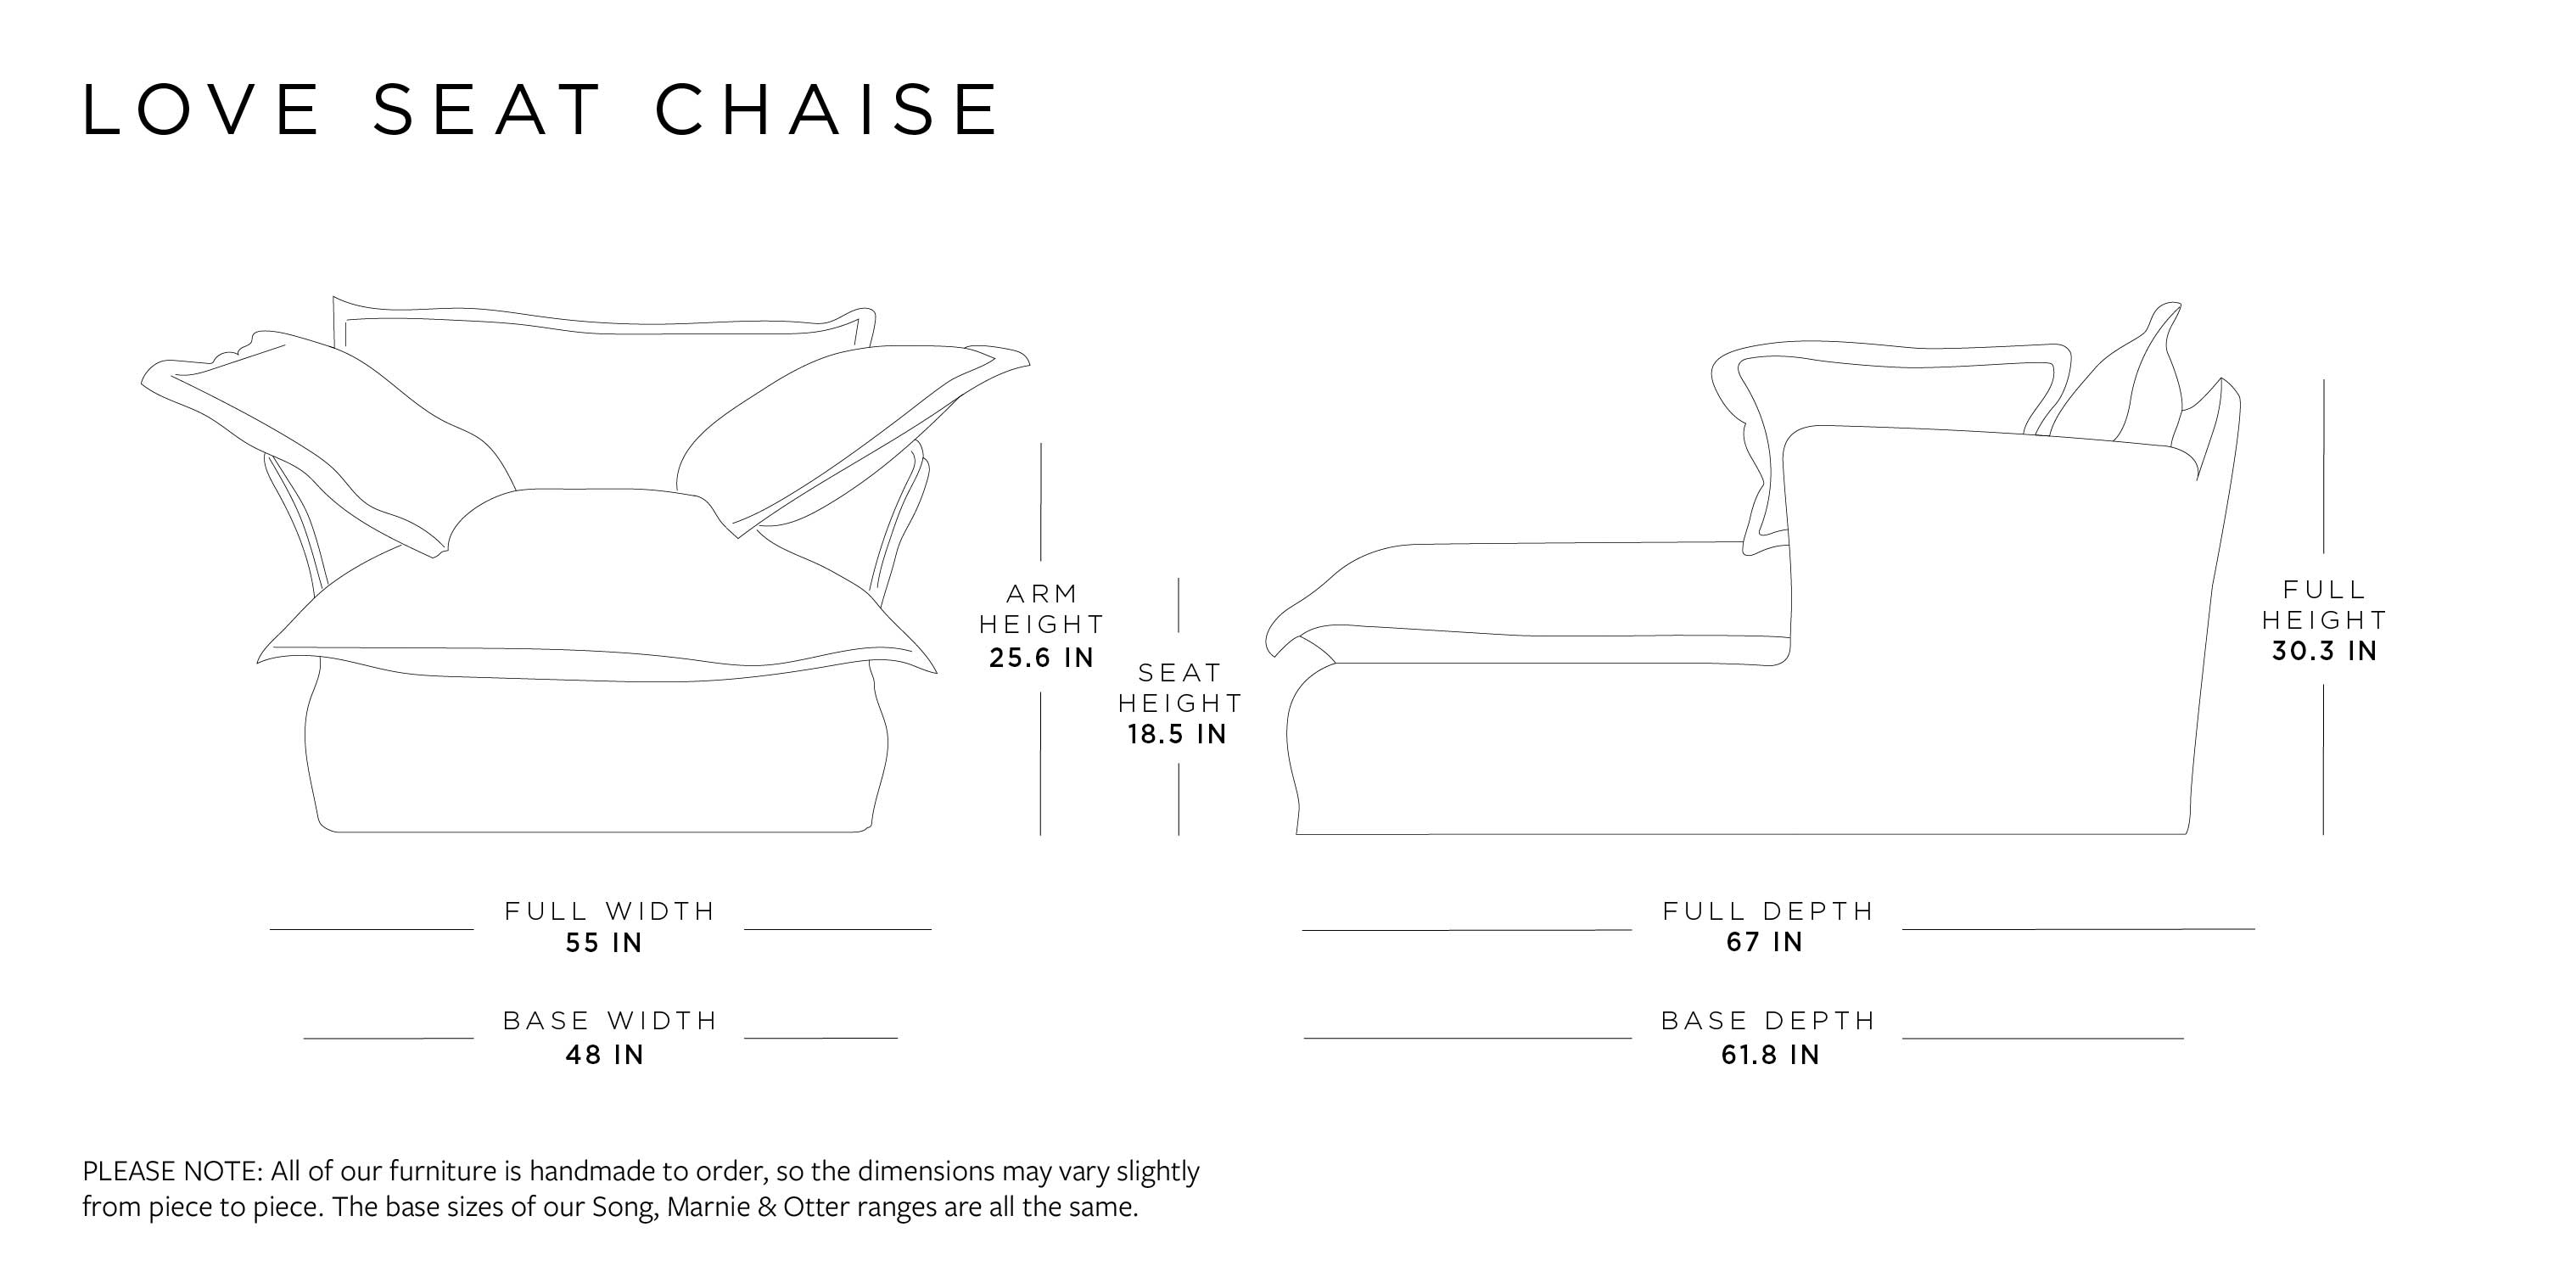 Loveseat Sofa Chaise | Song Range Size Guide